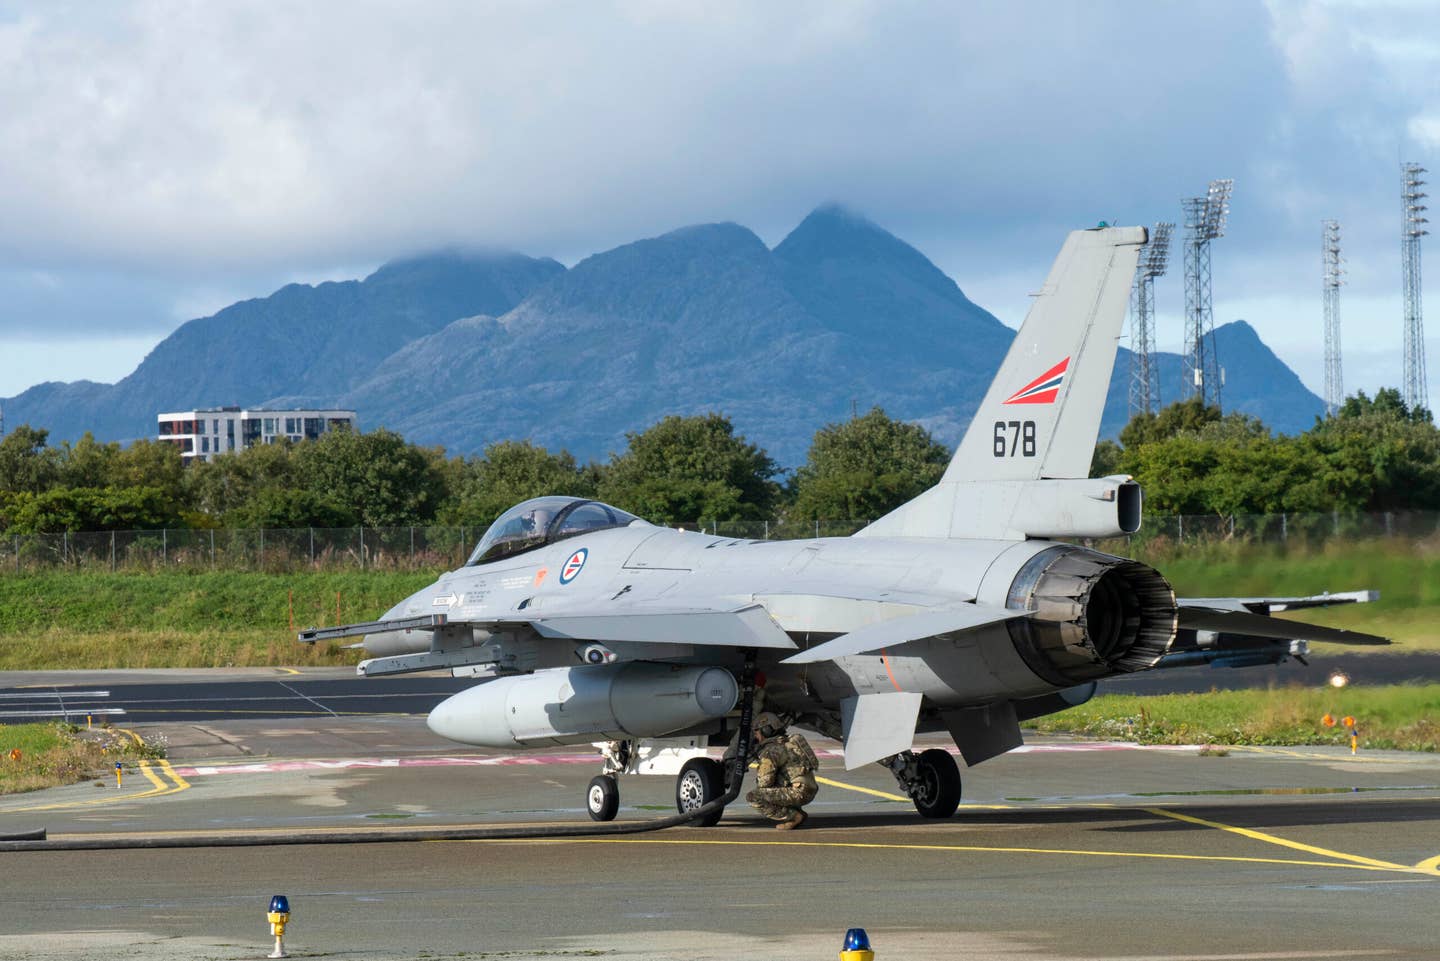 A Royal Norwegian Air Force F-16AM is refueled during a training exercise at Rygge Air Station, Norway, in August 2020, before the type was withdrawn from Norwegian service. <em>U.S. Air Force photo by Staff Sgt. Michael Washburn<br></em>